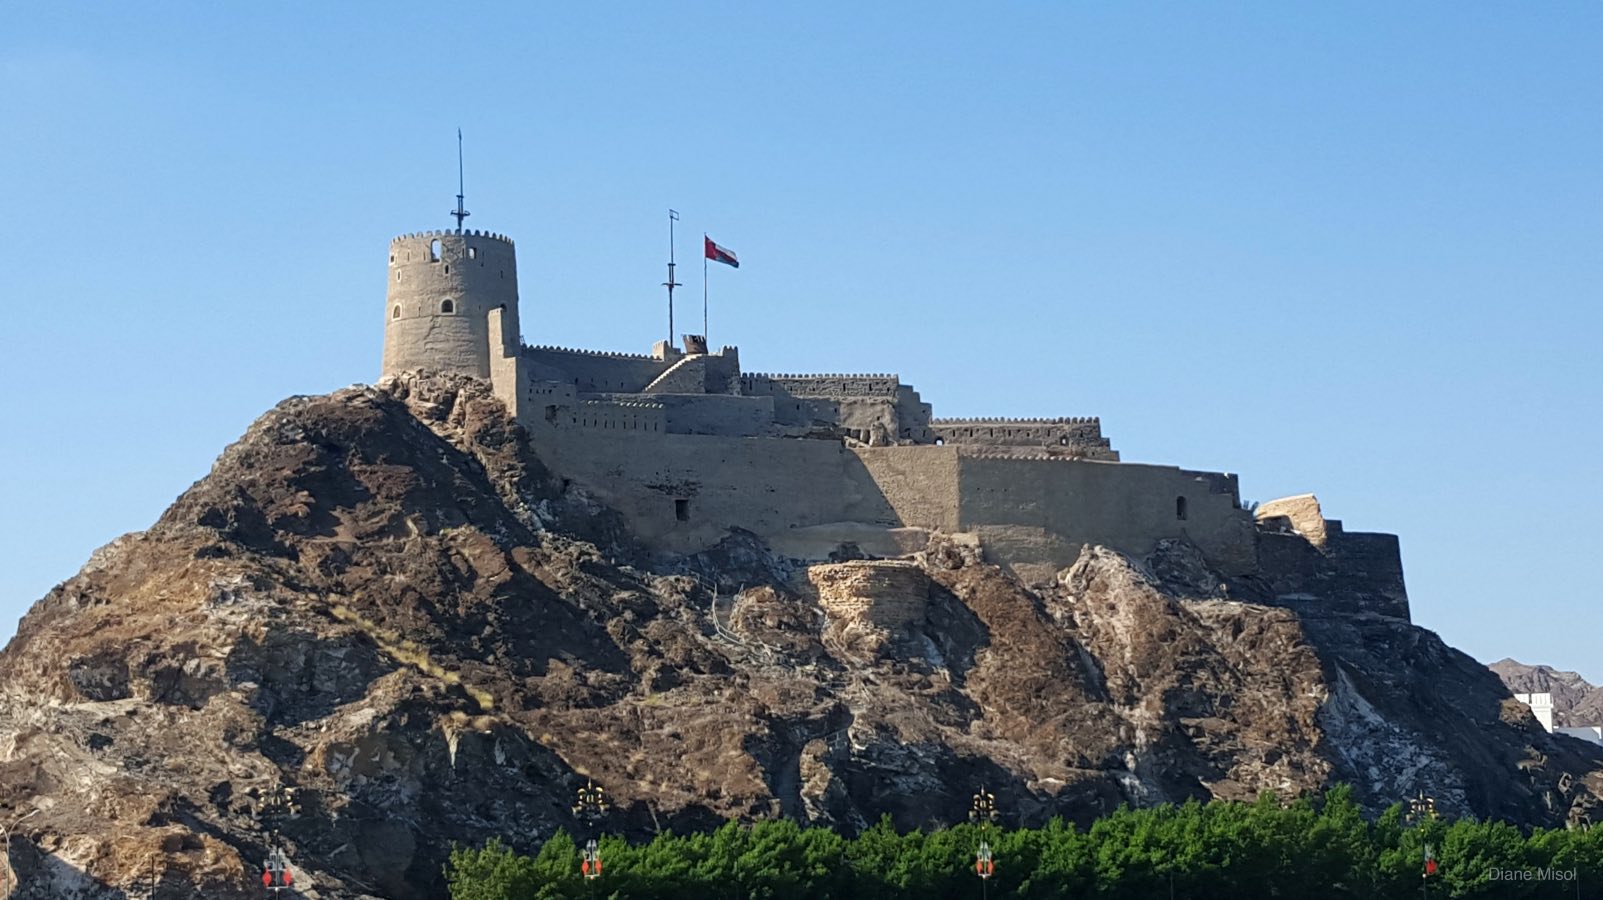 One of many Forts and Castles, Muscat, Oman